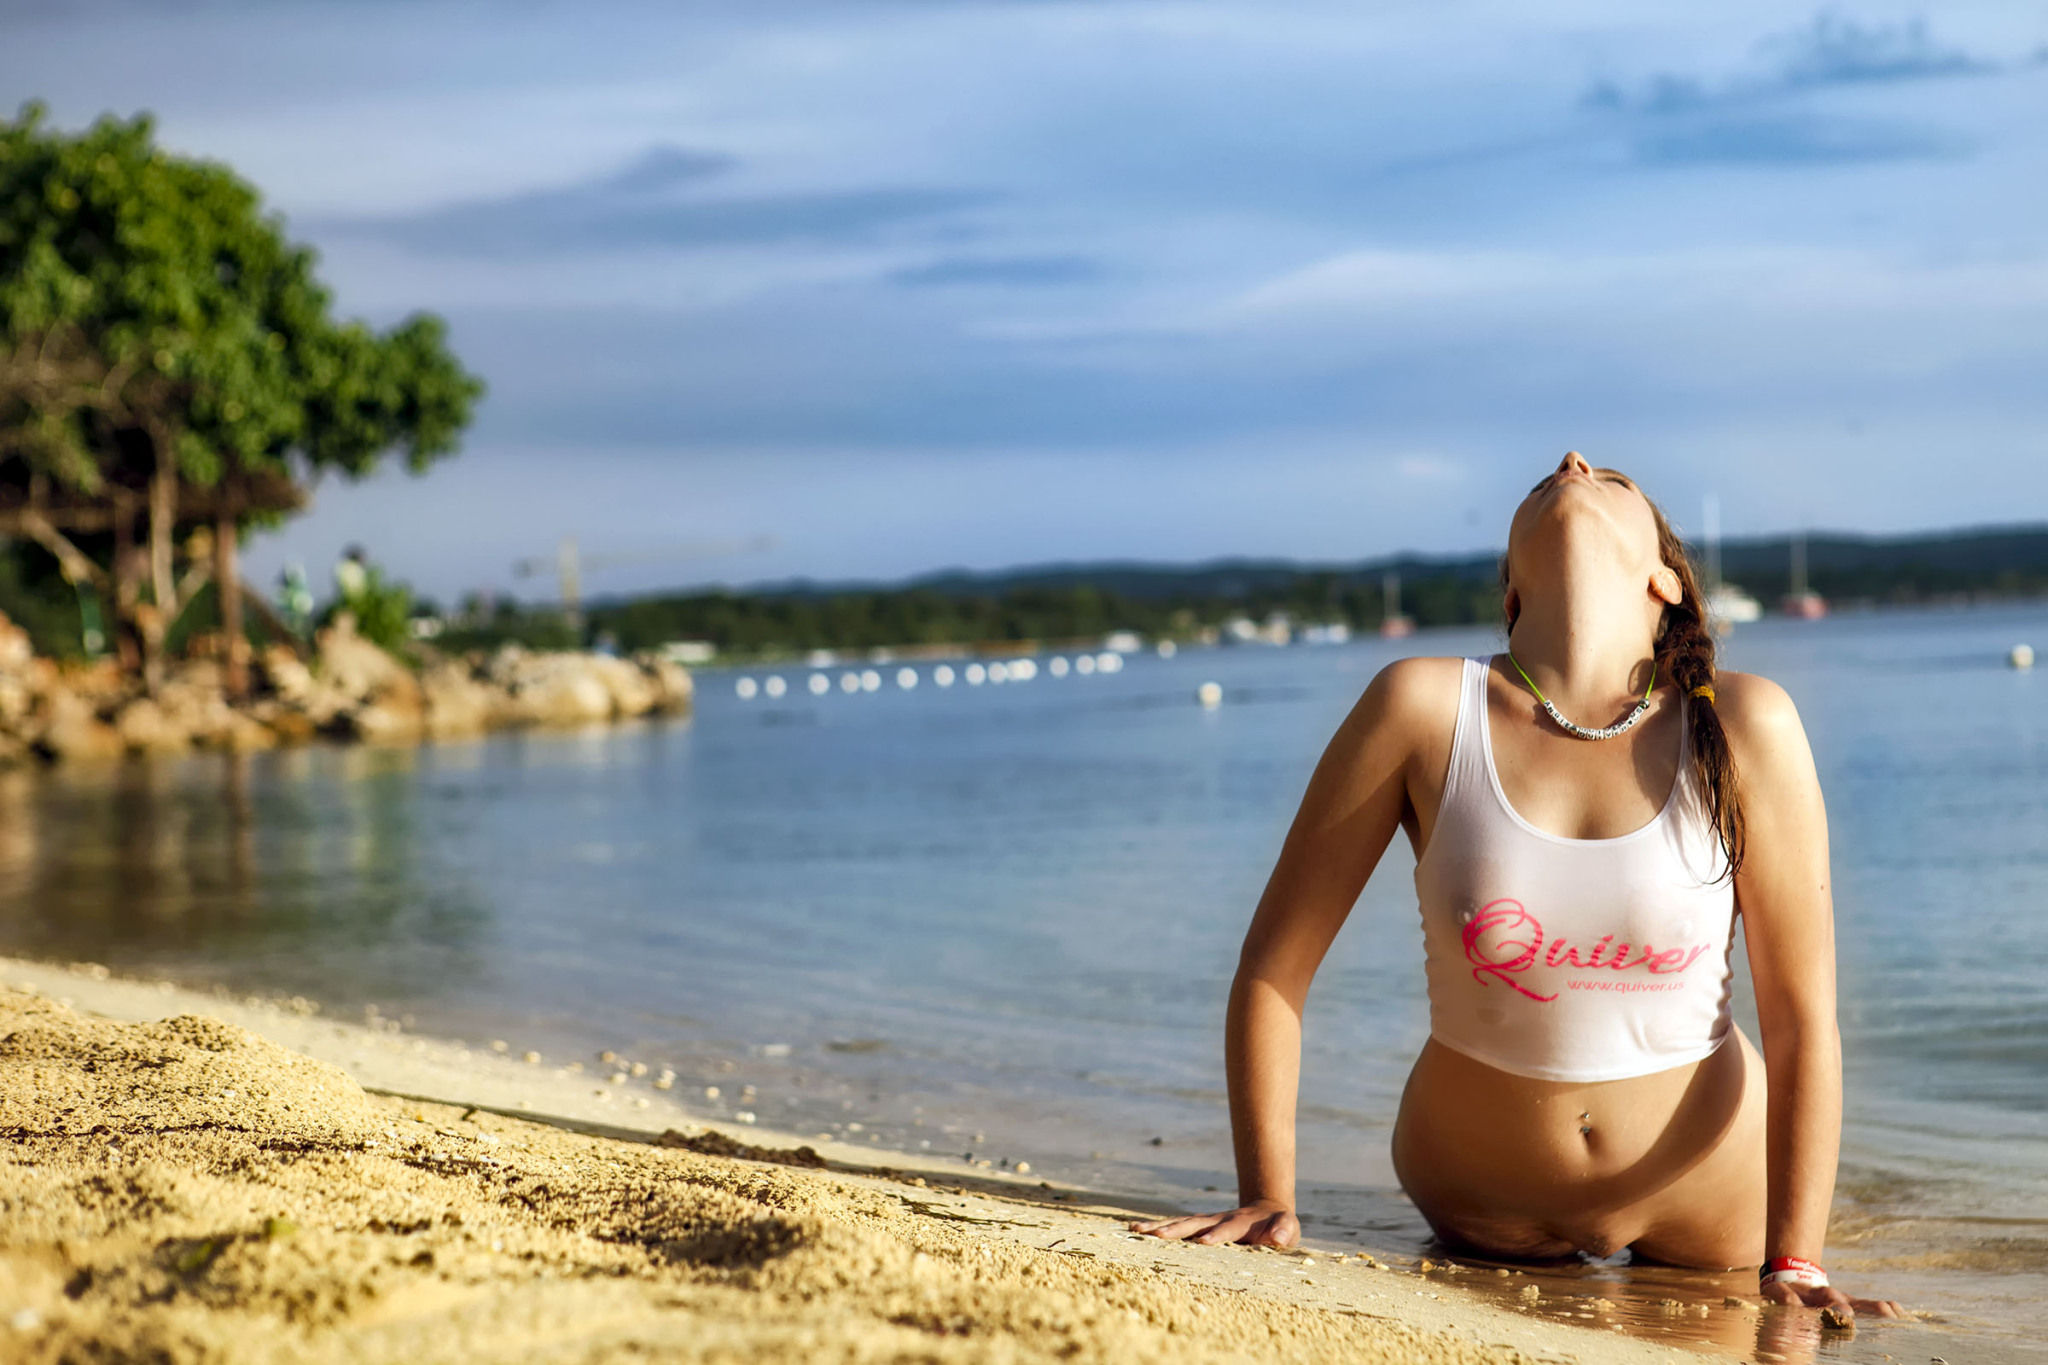 modern-hedonist:My ex-wife and former muse at a photoshoot we did at a beach in Jamaica. Looking for my next muse. Find my uncensored work on my OnlyFans (modernhedonist) 